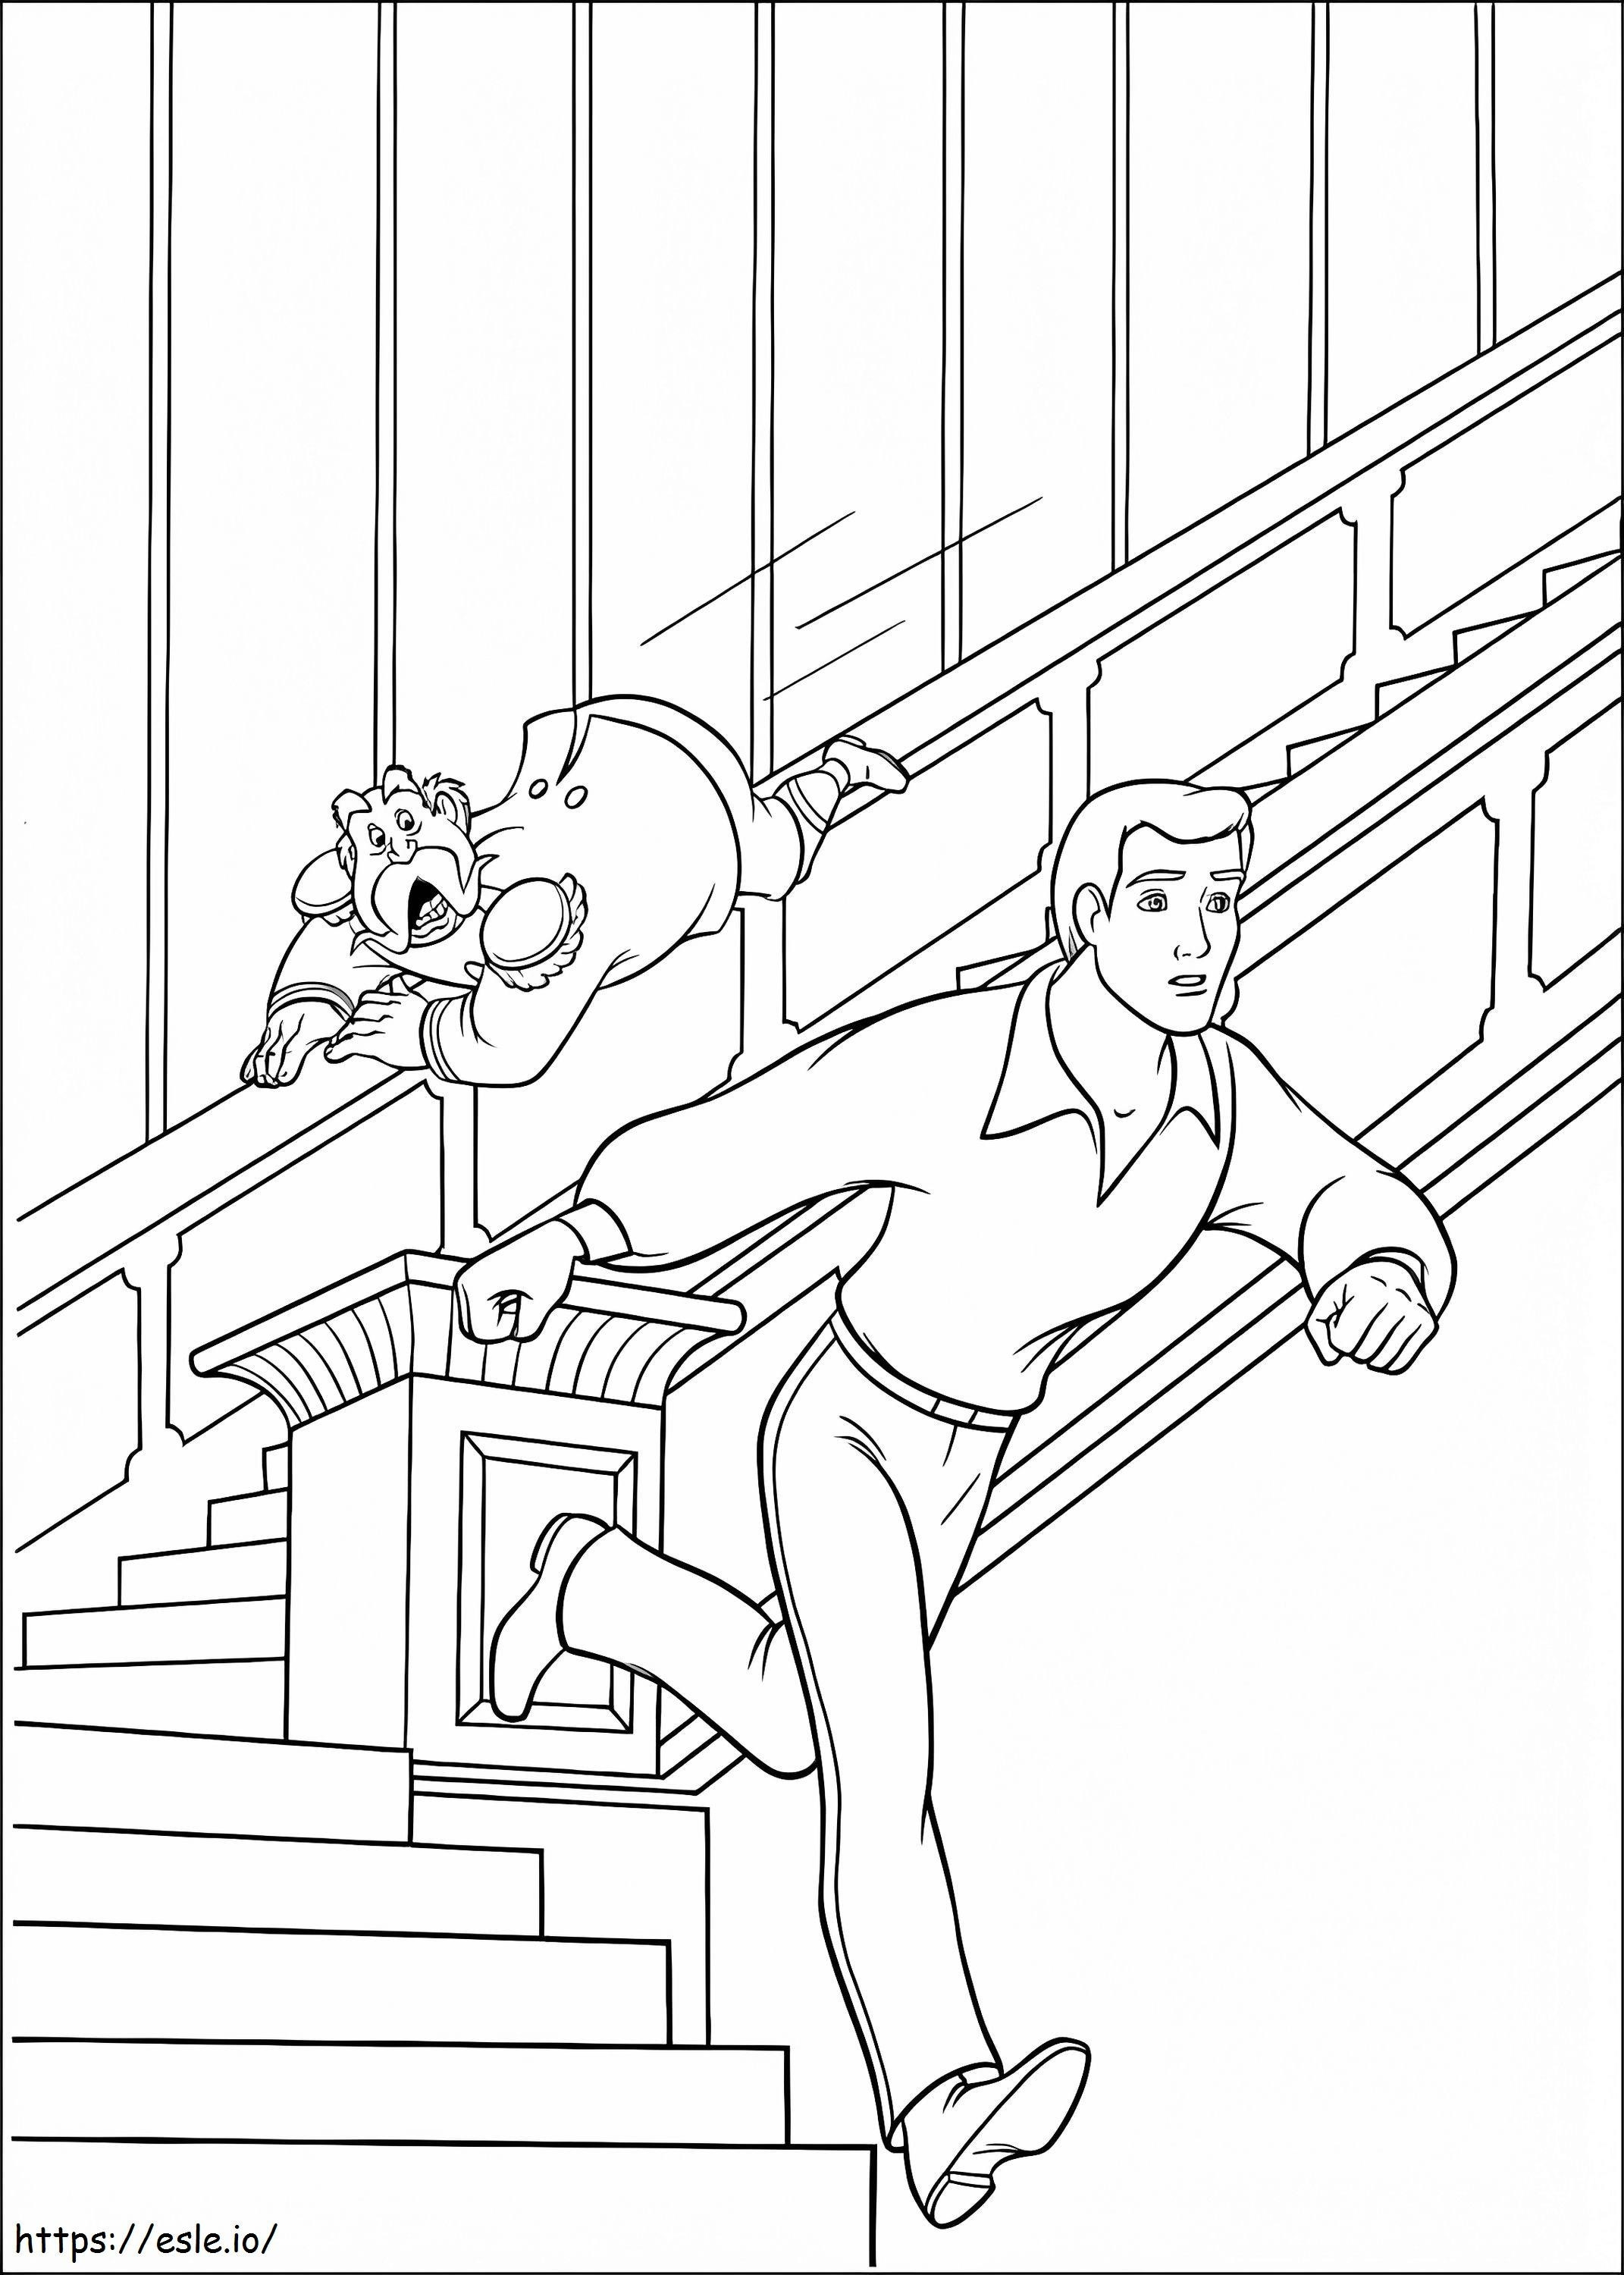 Prince Charming Running coloring page